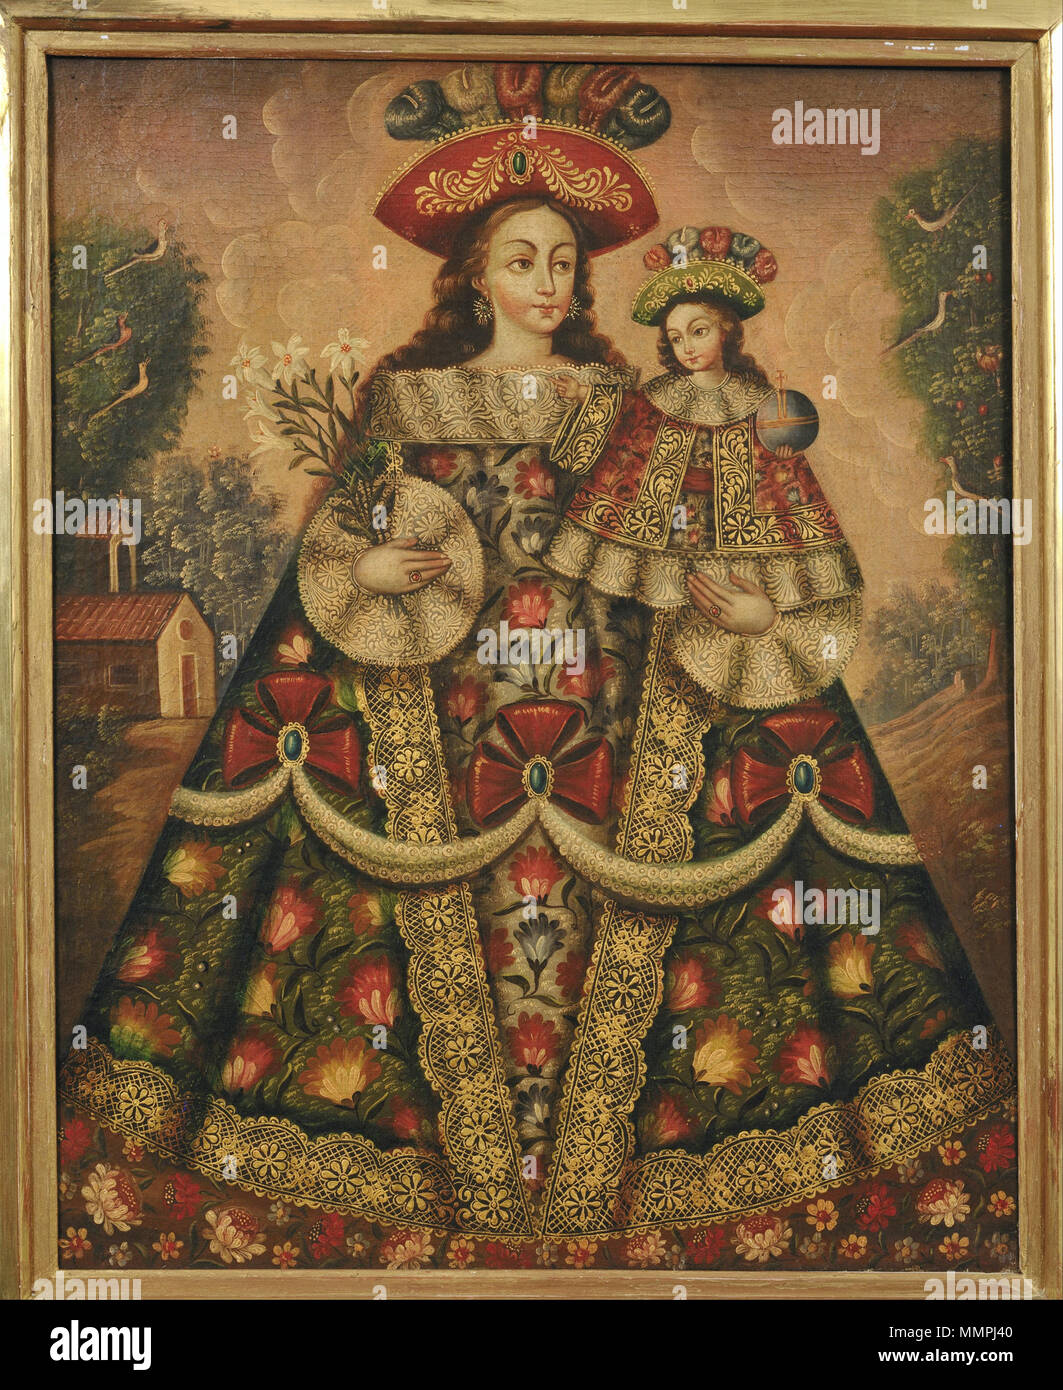 The Virgin of the Pilgrims and Child. 18th century. Anonymous, Cuzco School, Peru - The Virgin of the Pilgrims and Child - Google Art Project Stock Photo